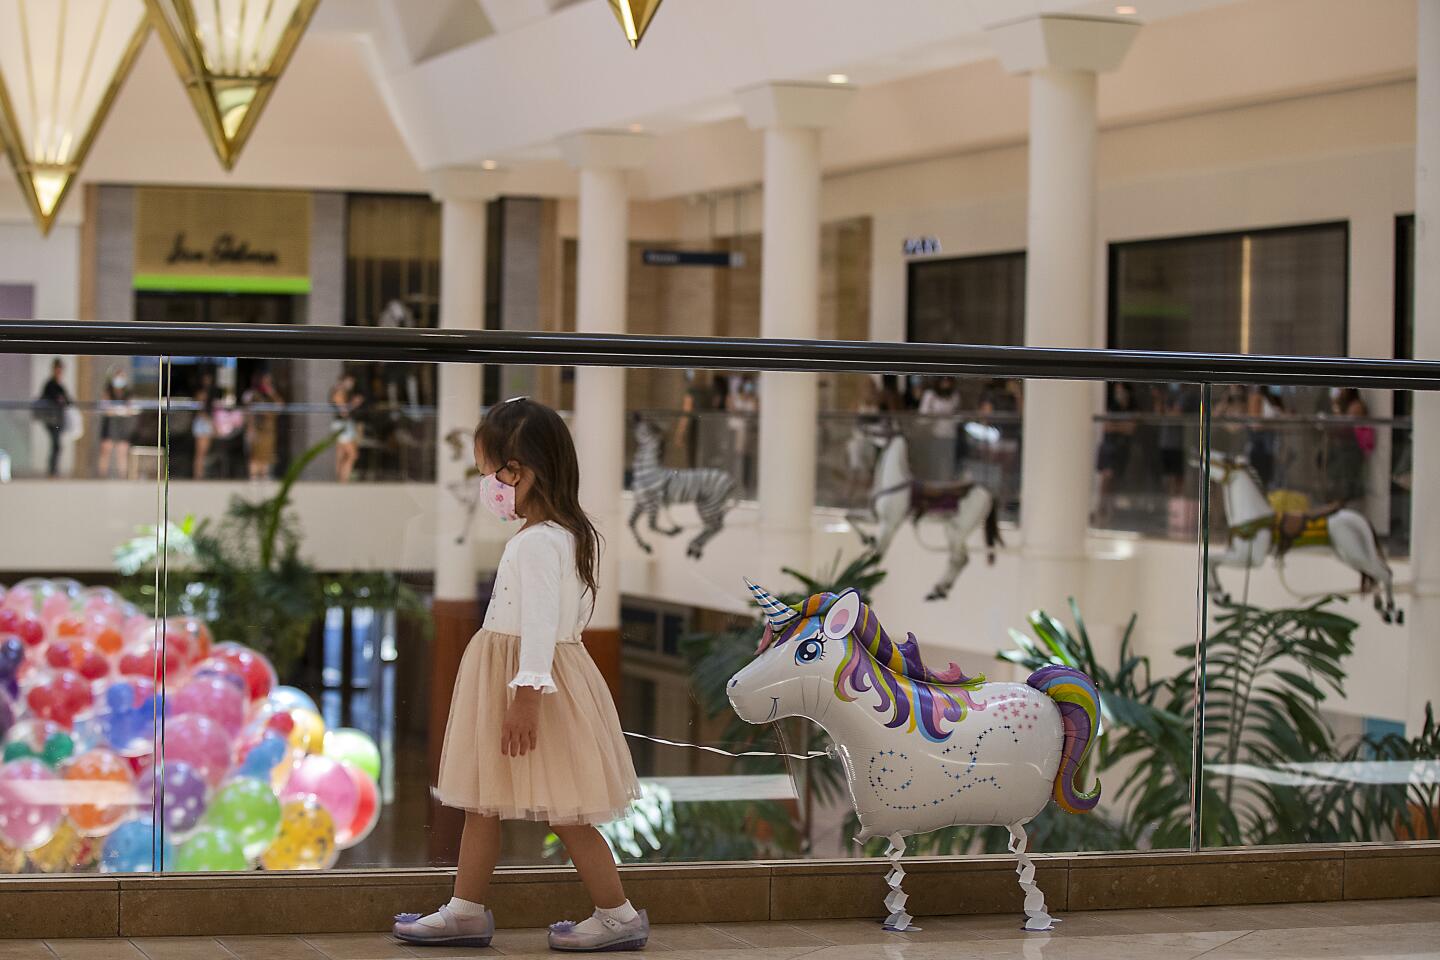 South Coast Plaza In Costa Mesa To Welcome Indoor Shoppers Monday 